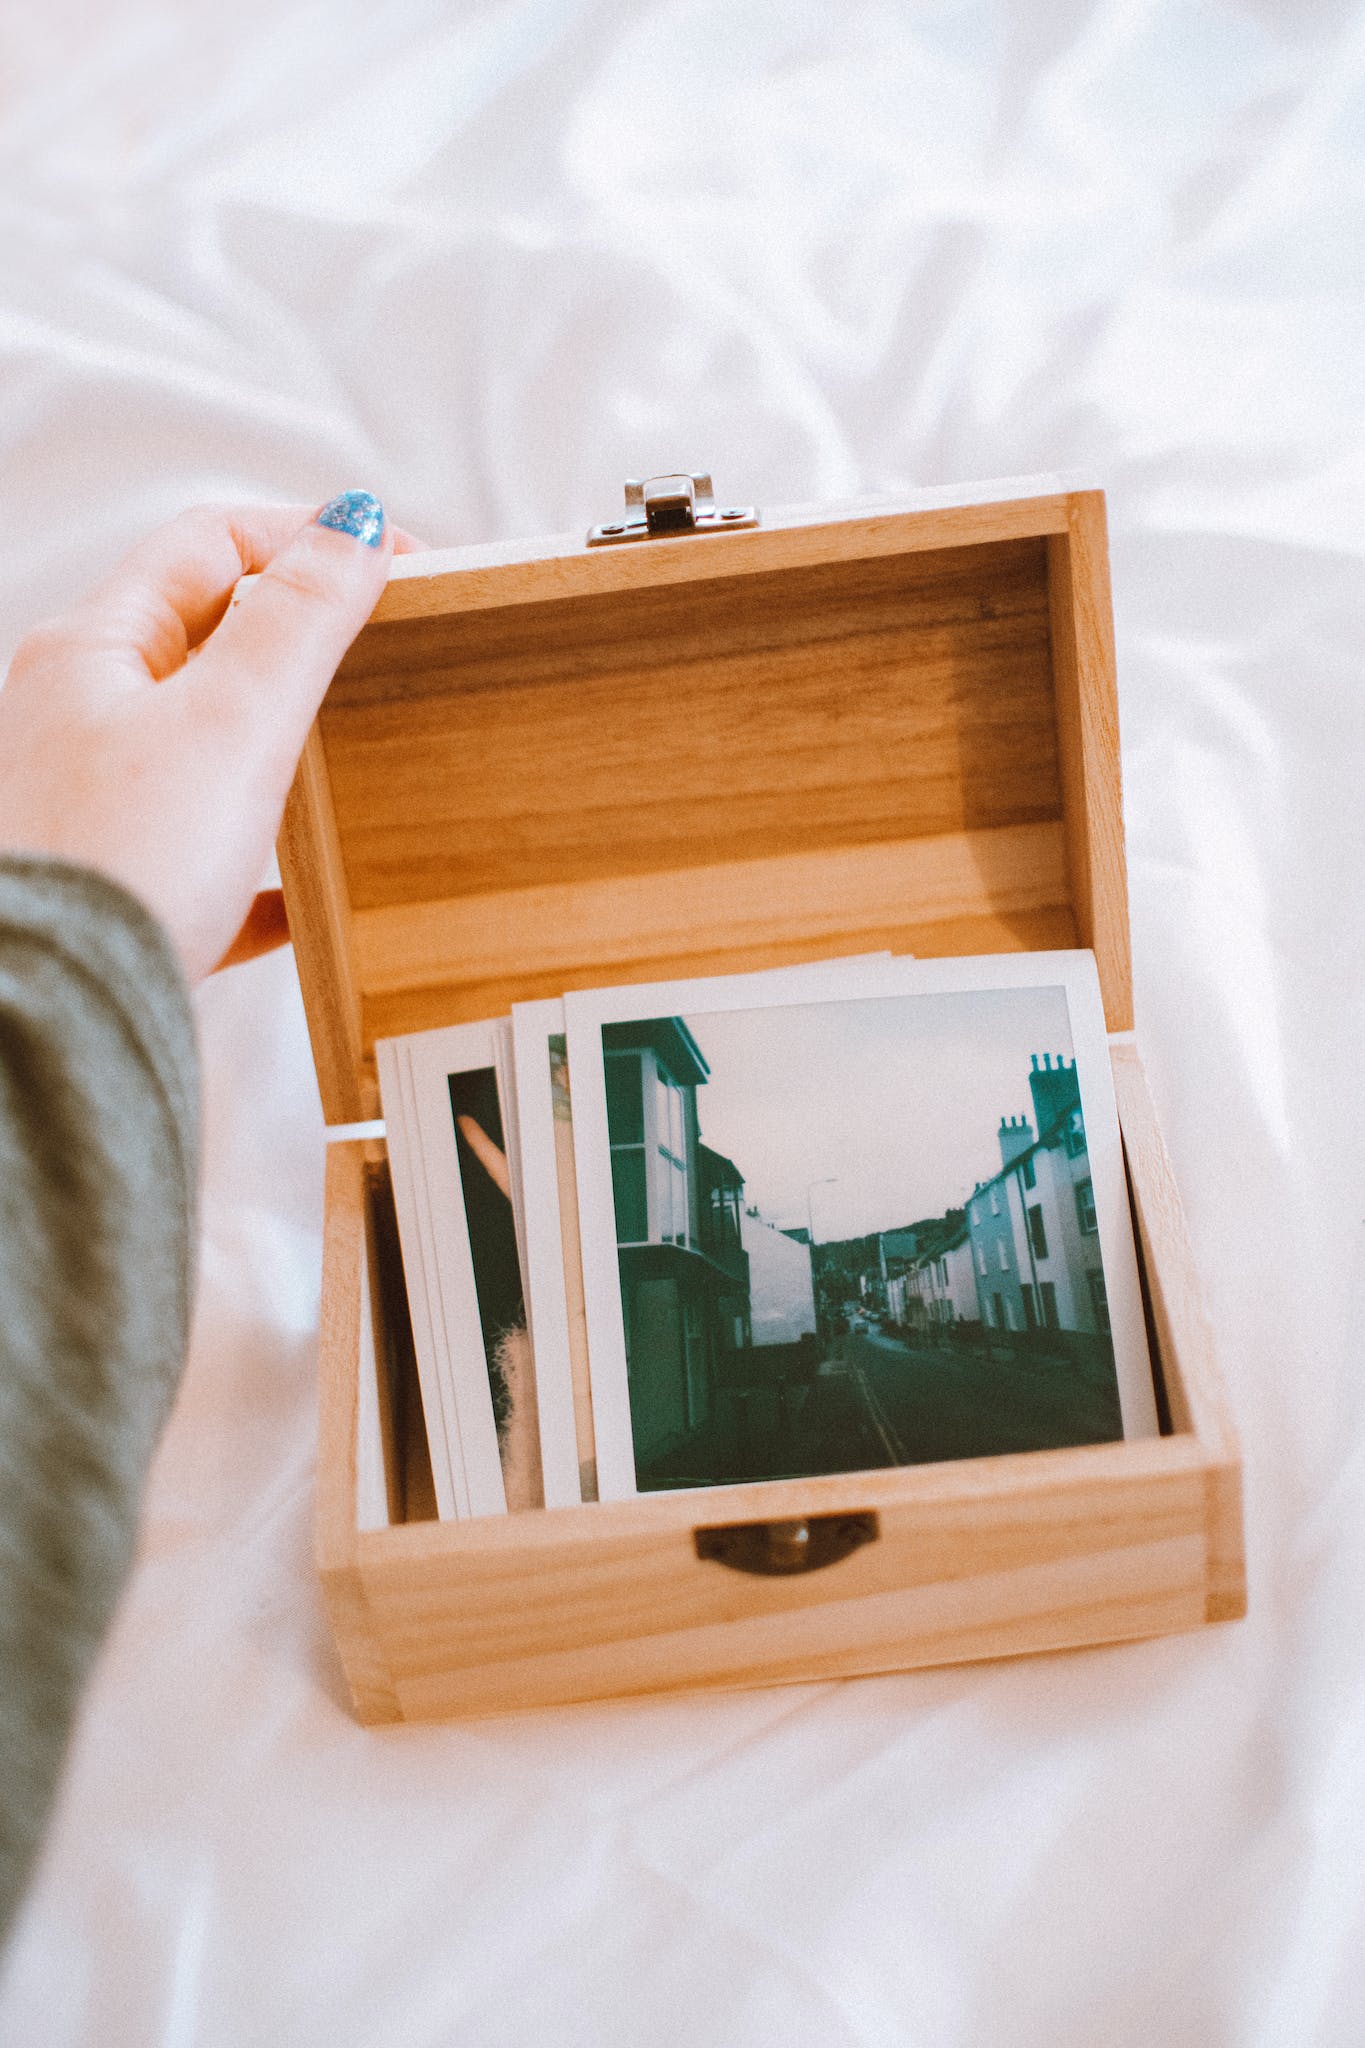 A wooden box full of images